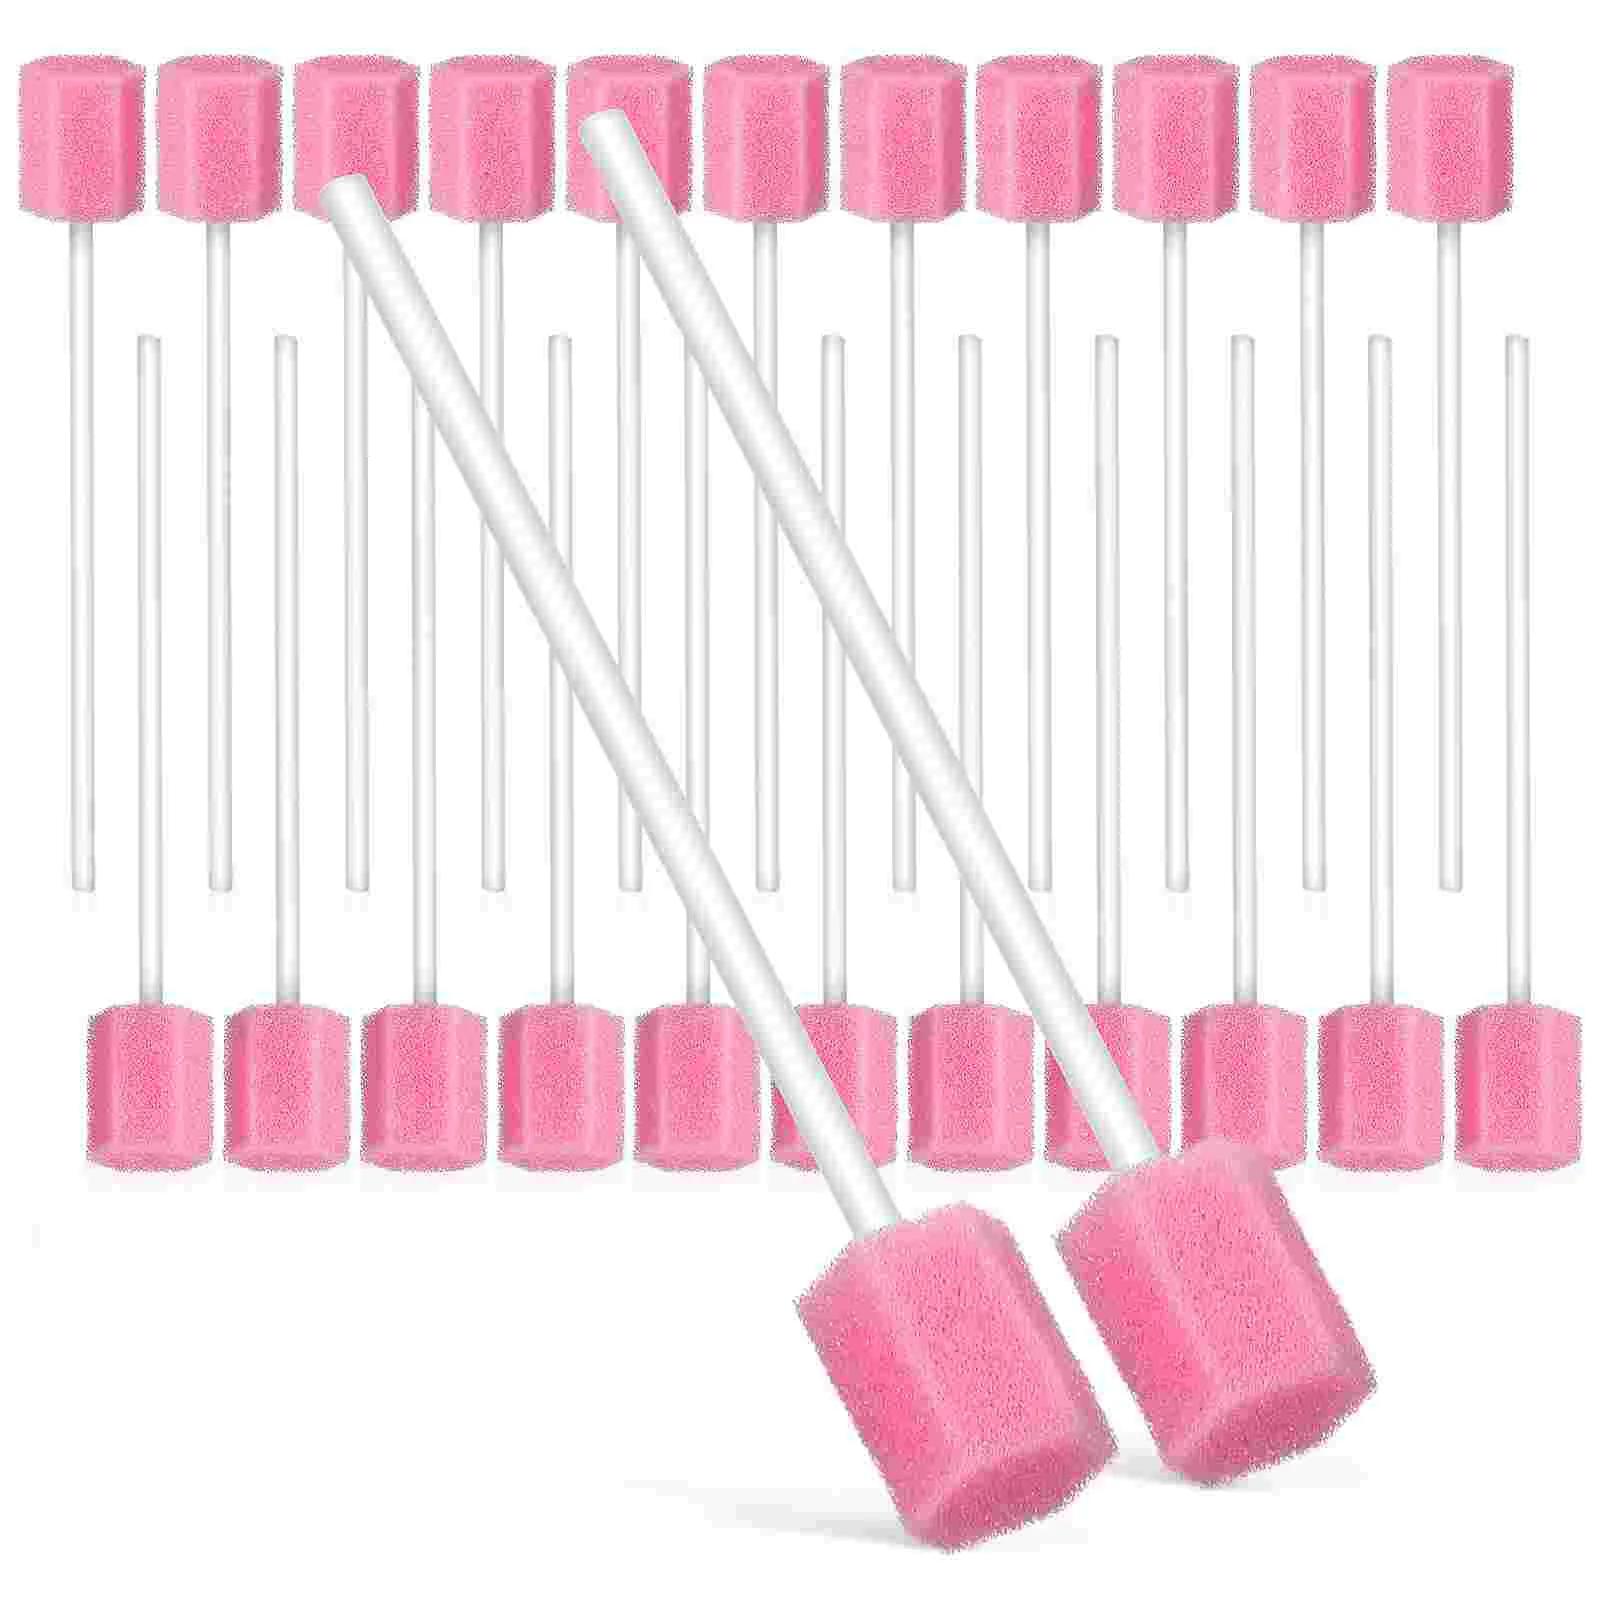 

150 Pcs Disposable Cotton Swab Baby Medicine Oral Care Sponge Swabs Mouth Dry Cleaning Adults Elder